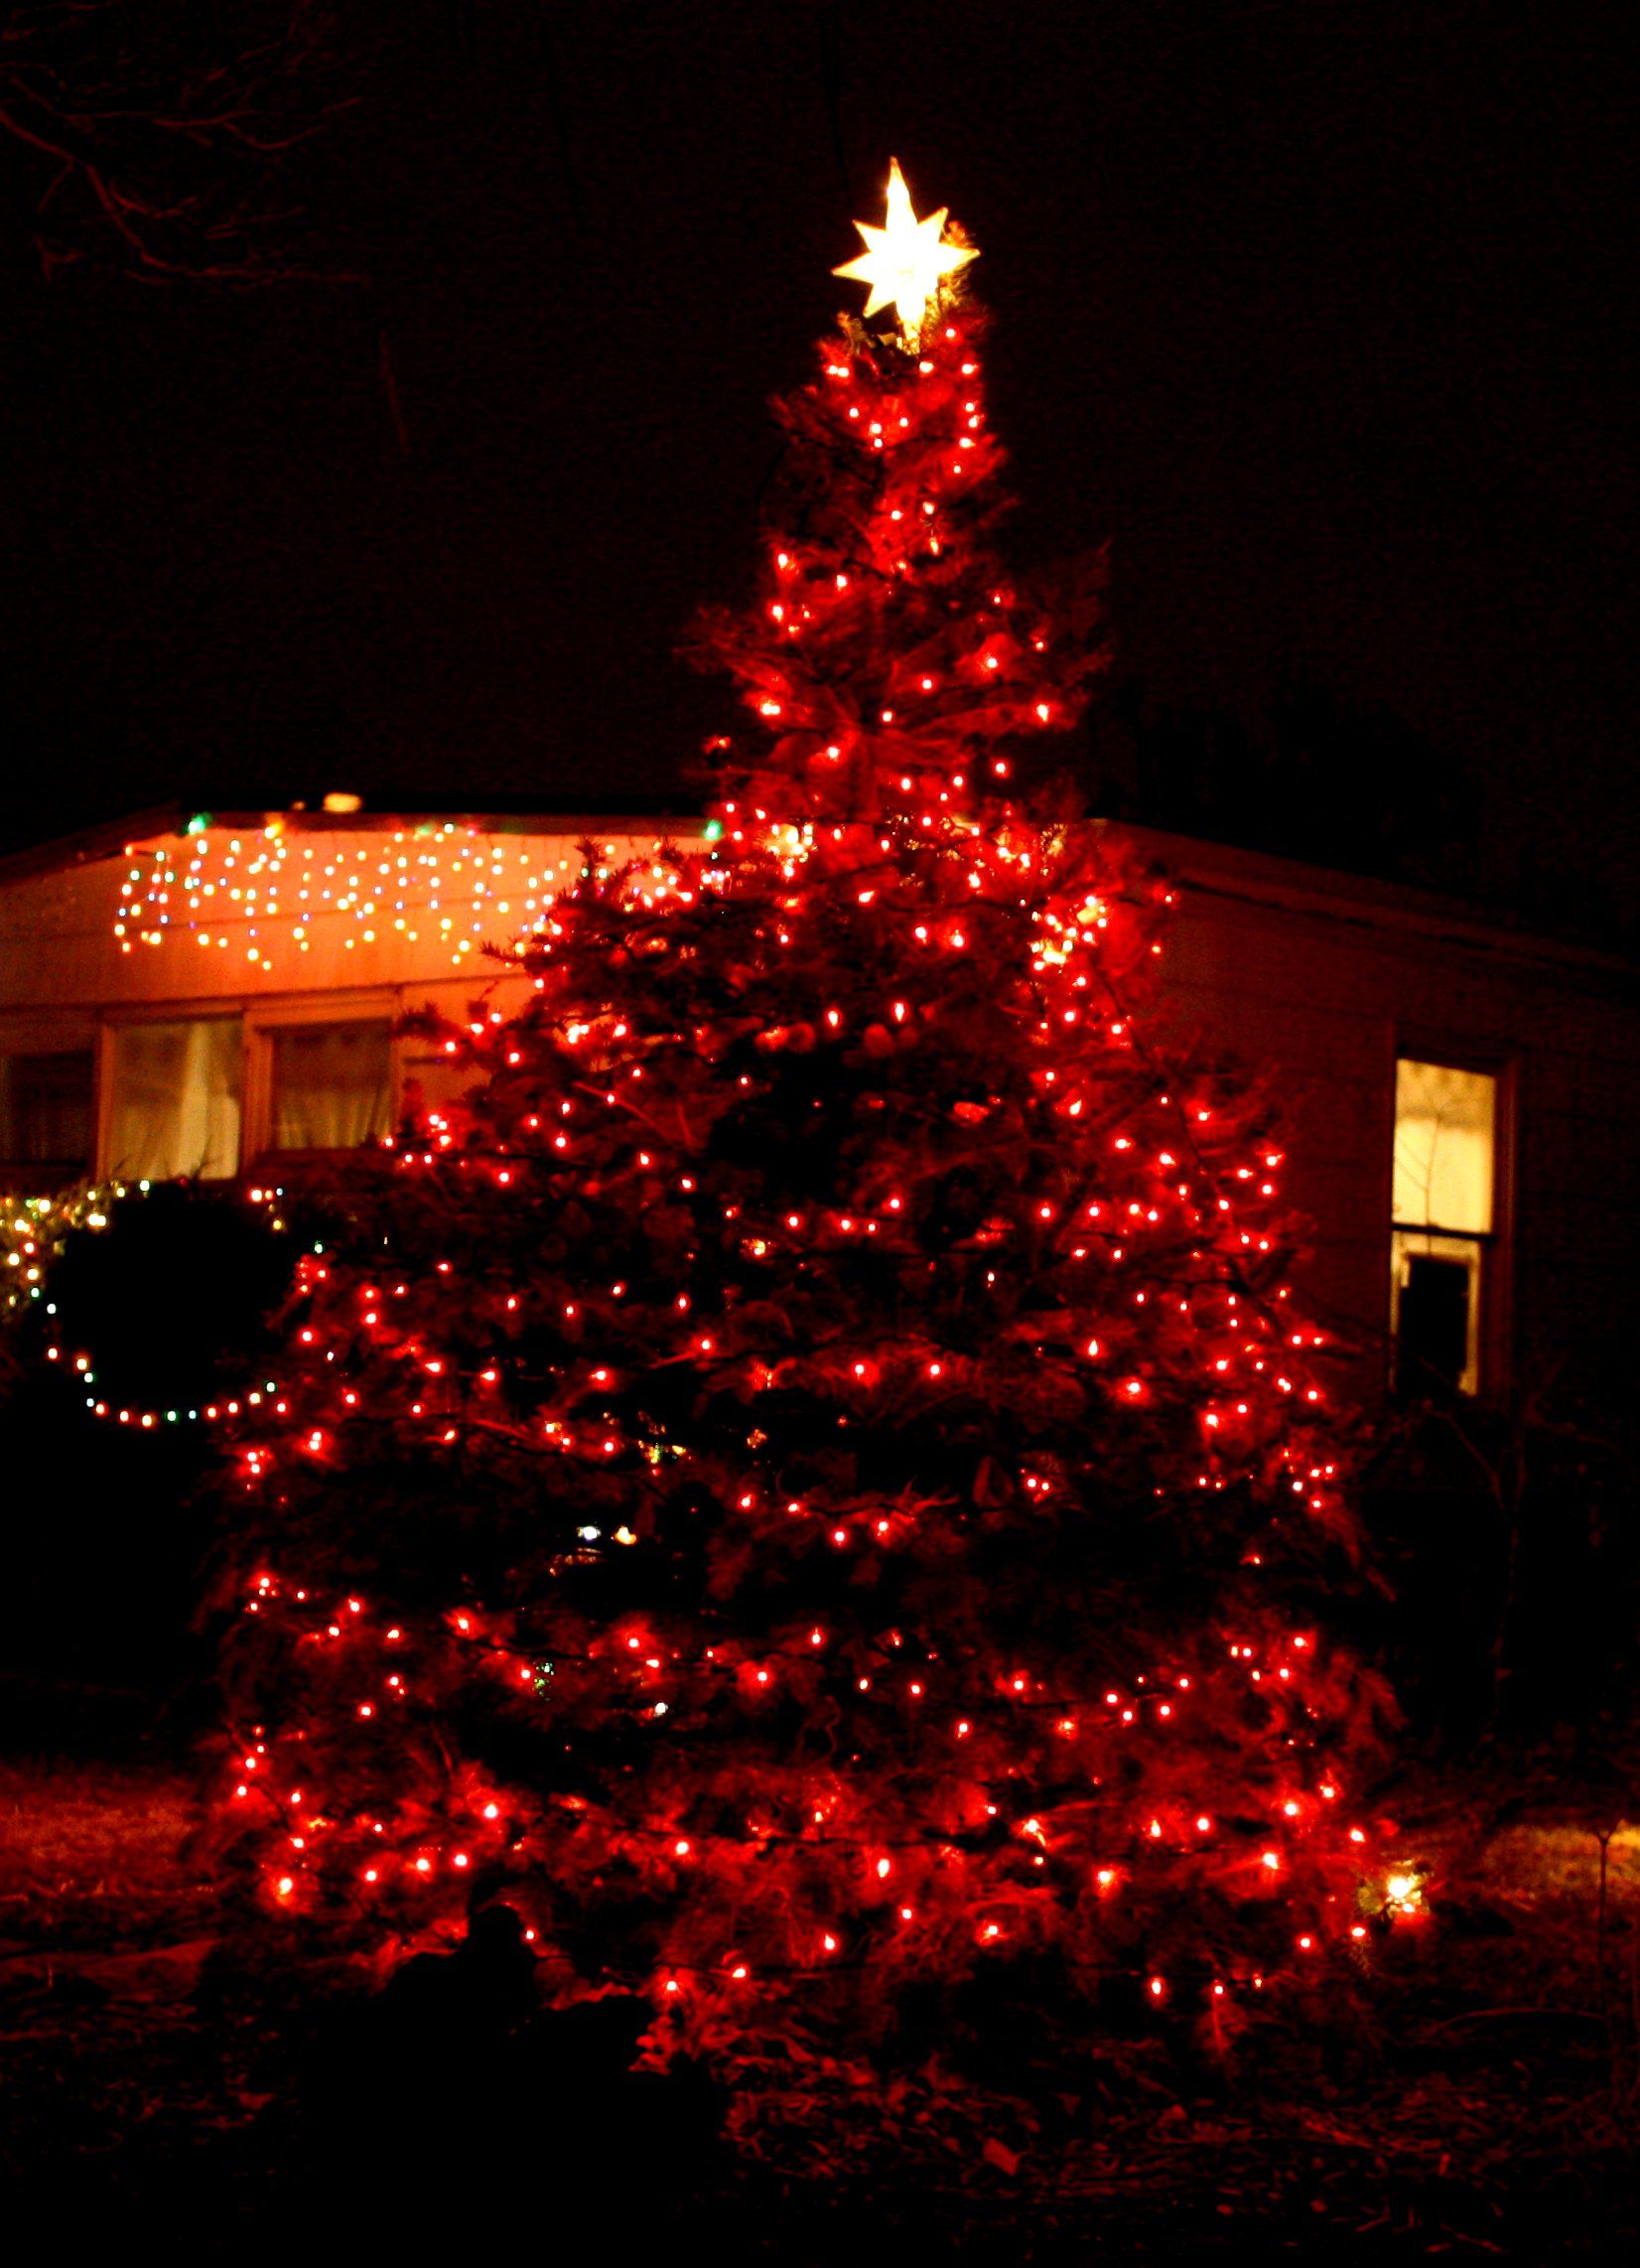 Christmas Tree with Red Lights Picture. Free Photograph. Photo Public Domain